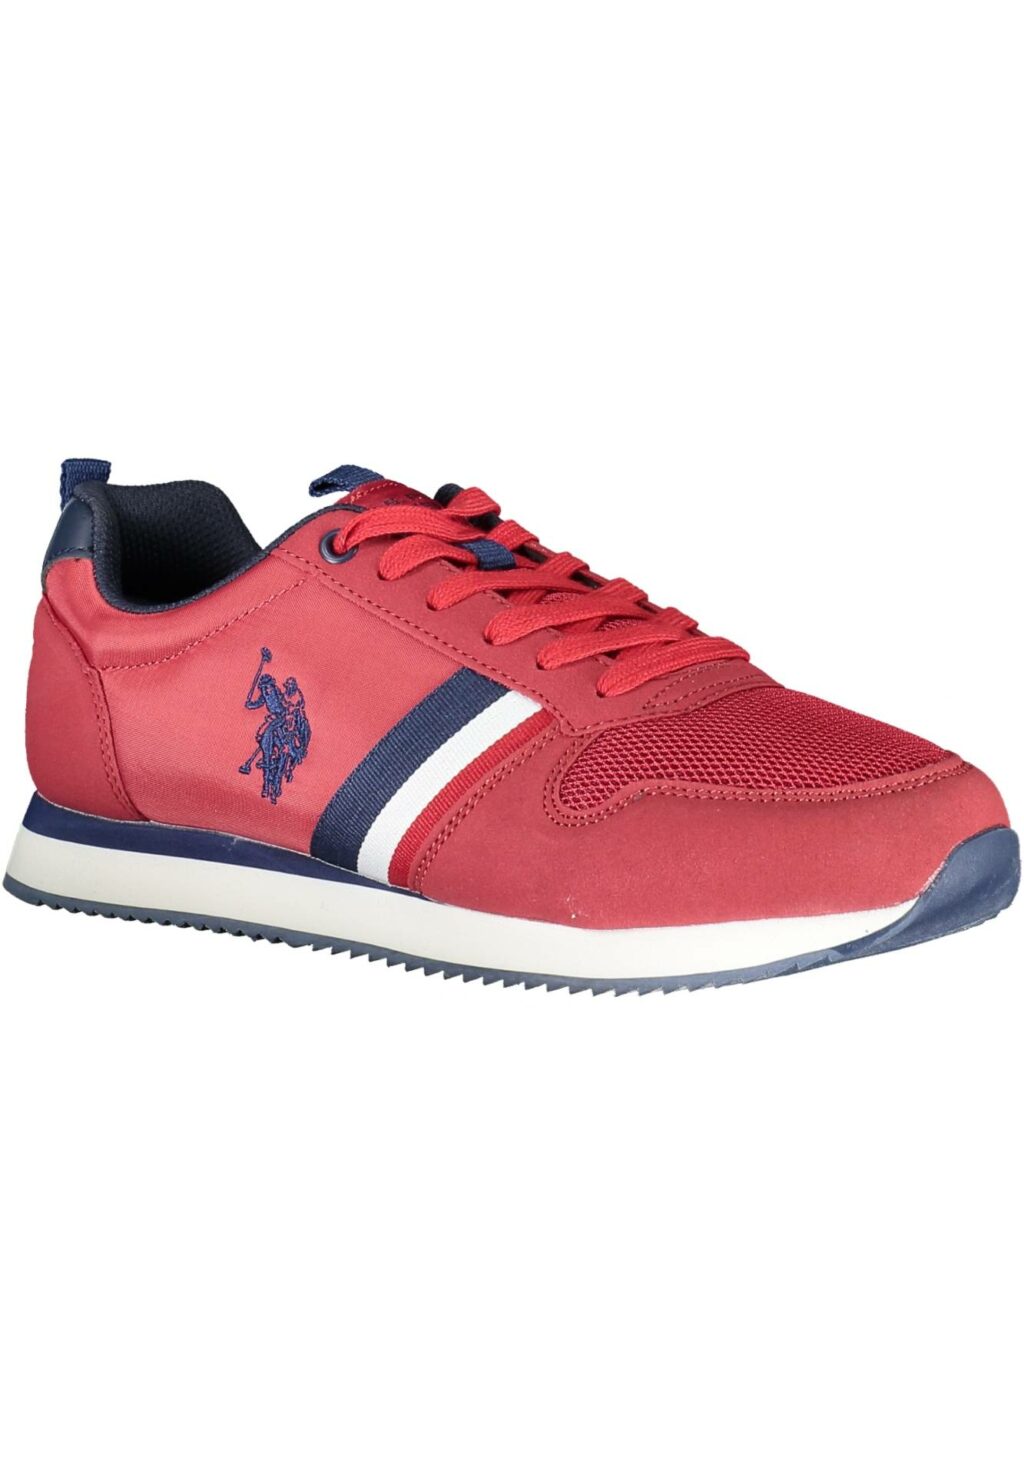 US POLO BEST PRICE MEN'S SPORTS SHOES RED NOBI-NOBIL4243S0TH1_ROSSO_RED